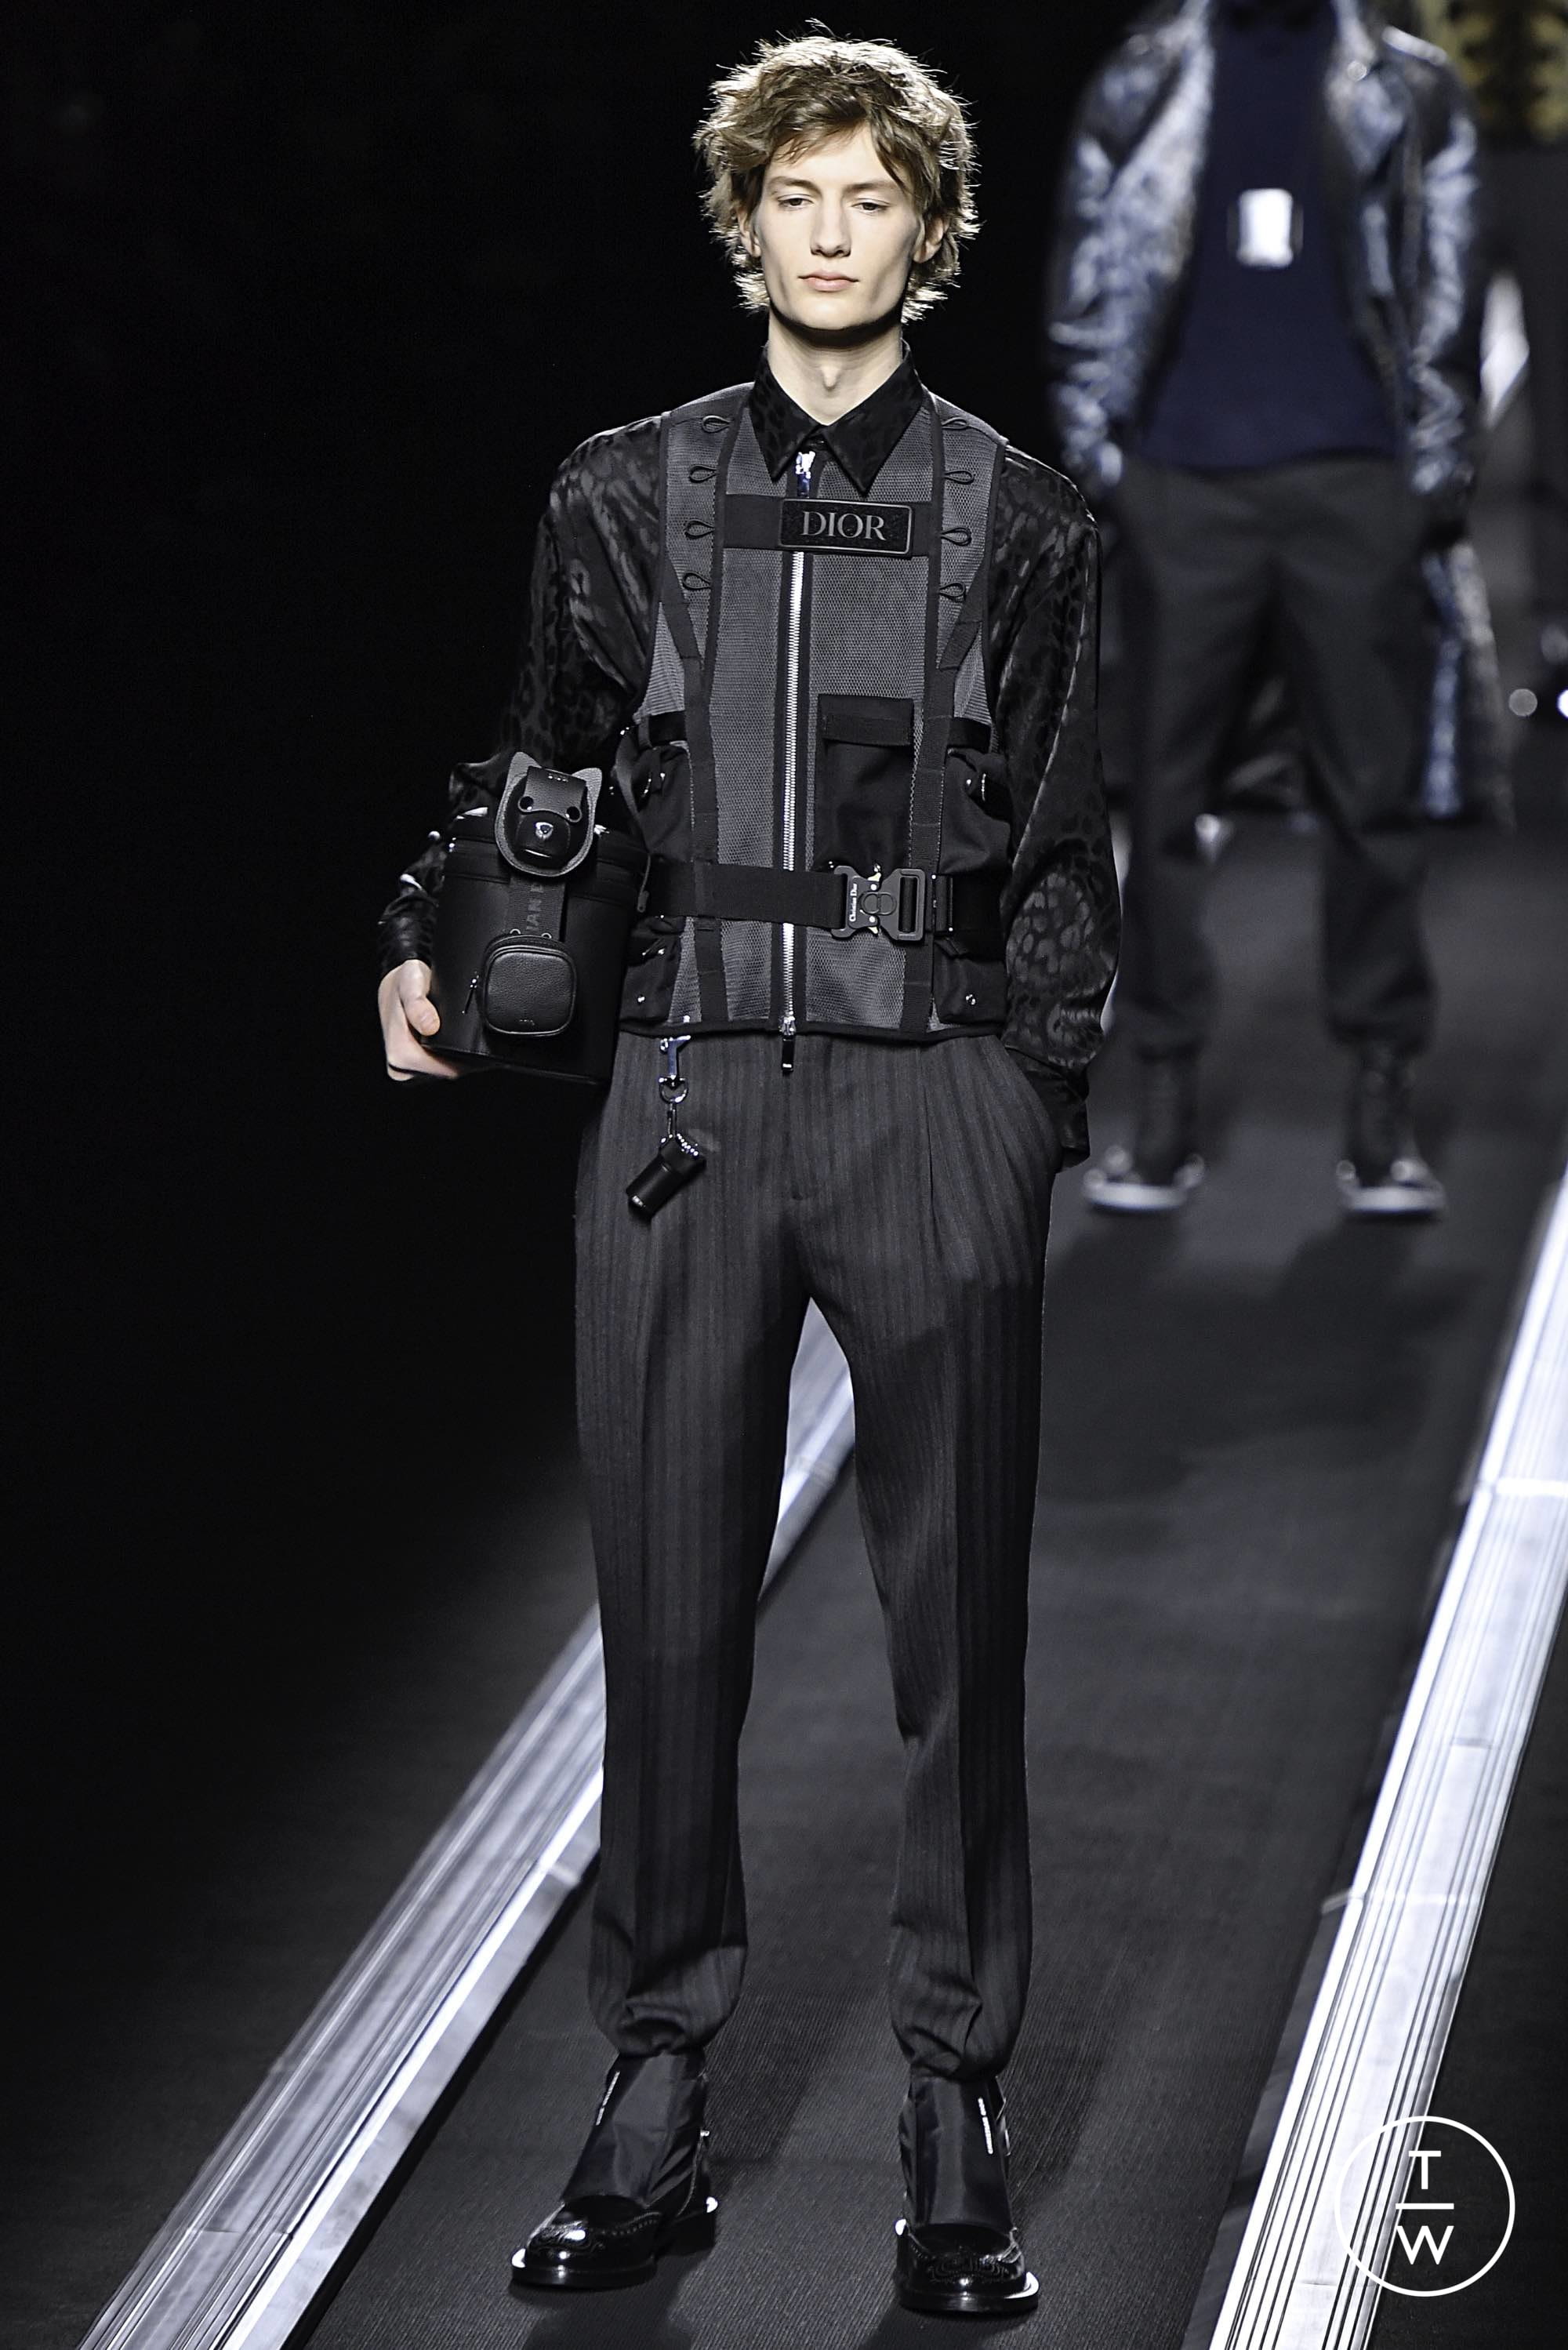 Dior Homme FW19 menswear #22 - The 